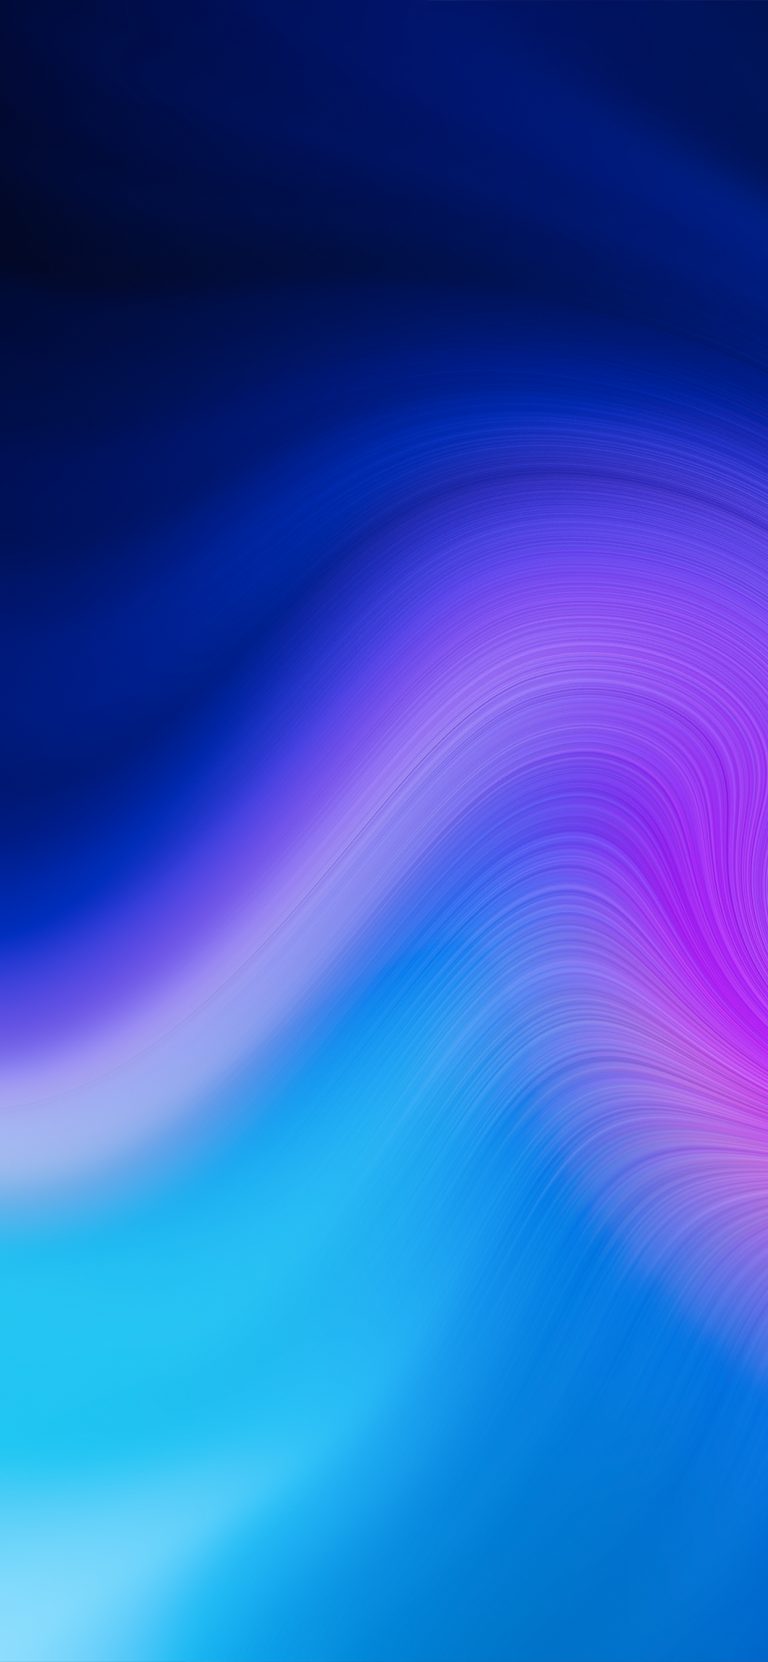 The Gradient Swirl Of Blue To Purple By Hk3ton On Twitter Zollotech